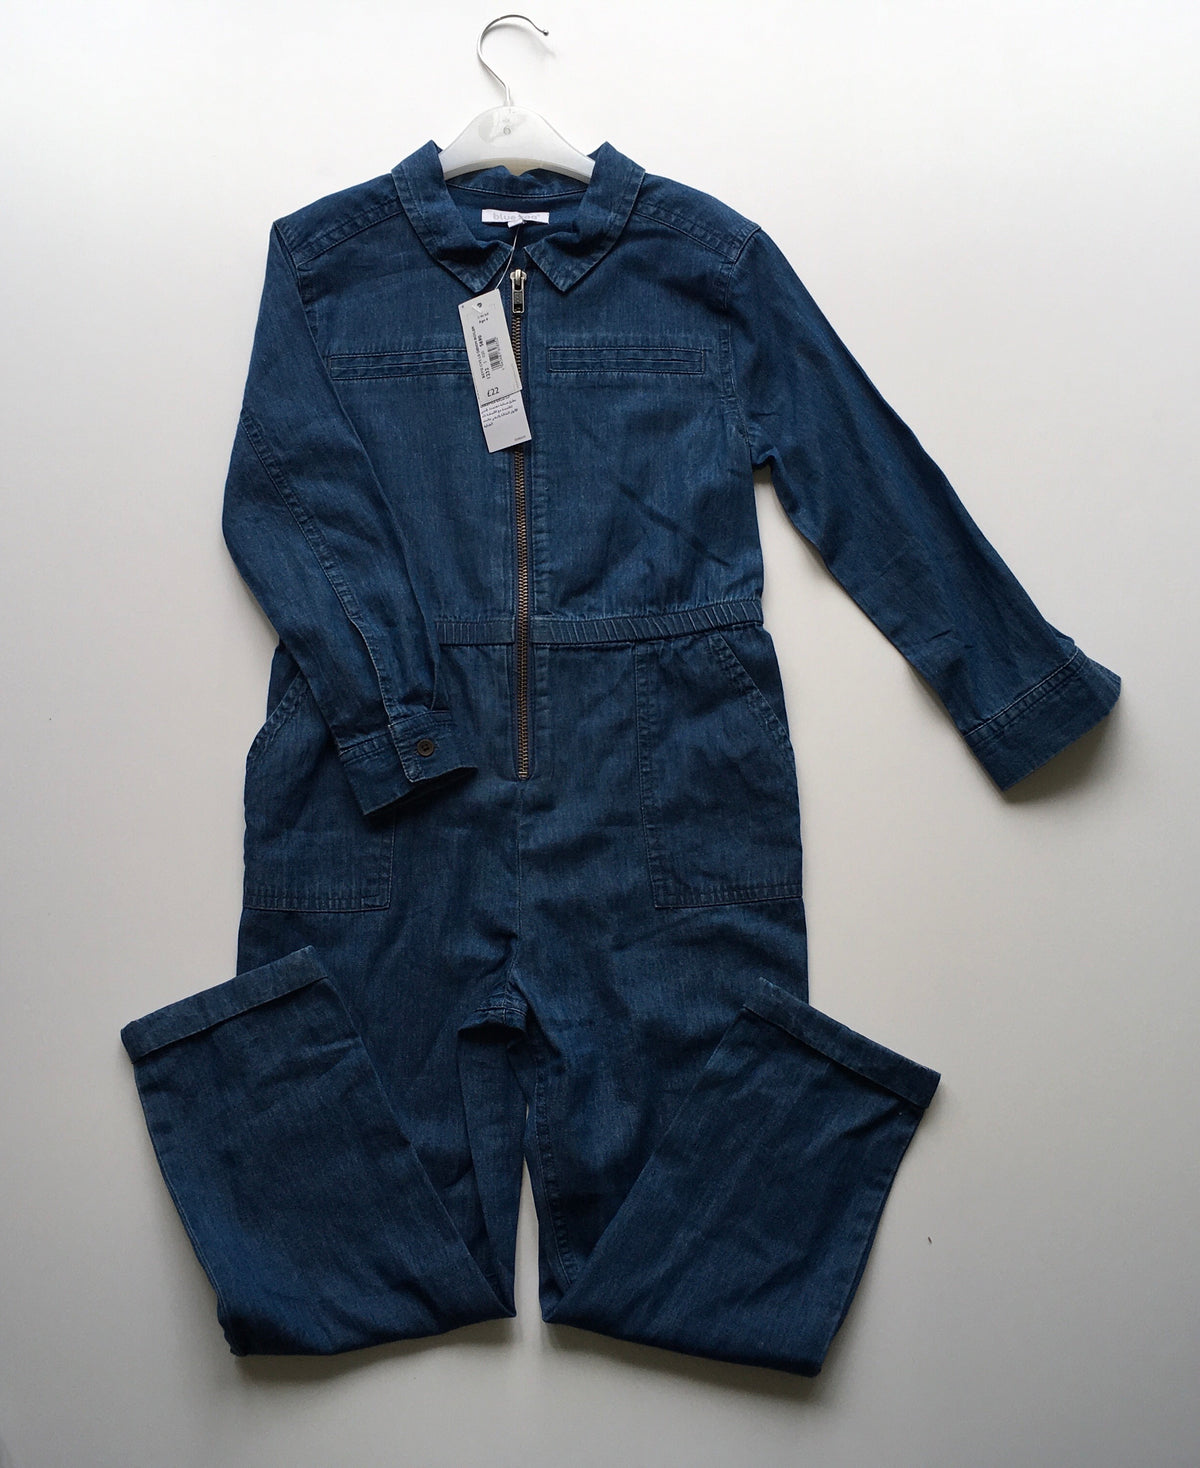 Bluezoo Jumpsuit, BNWT, Girls 5-6/ 6 Years